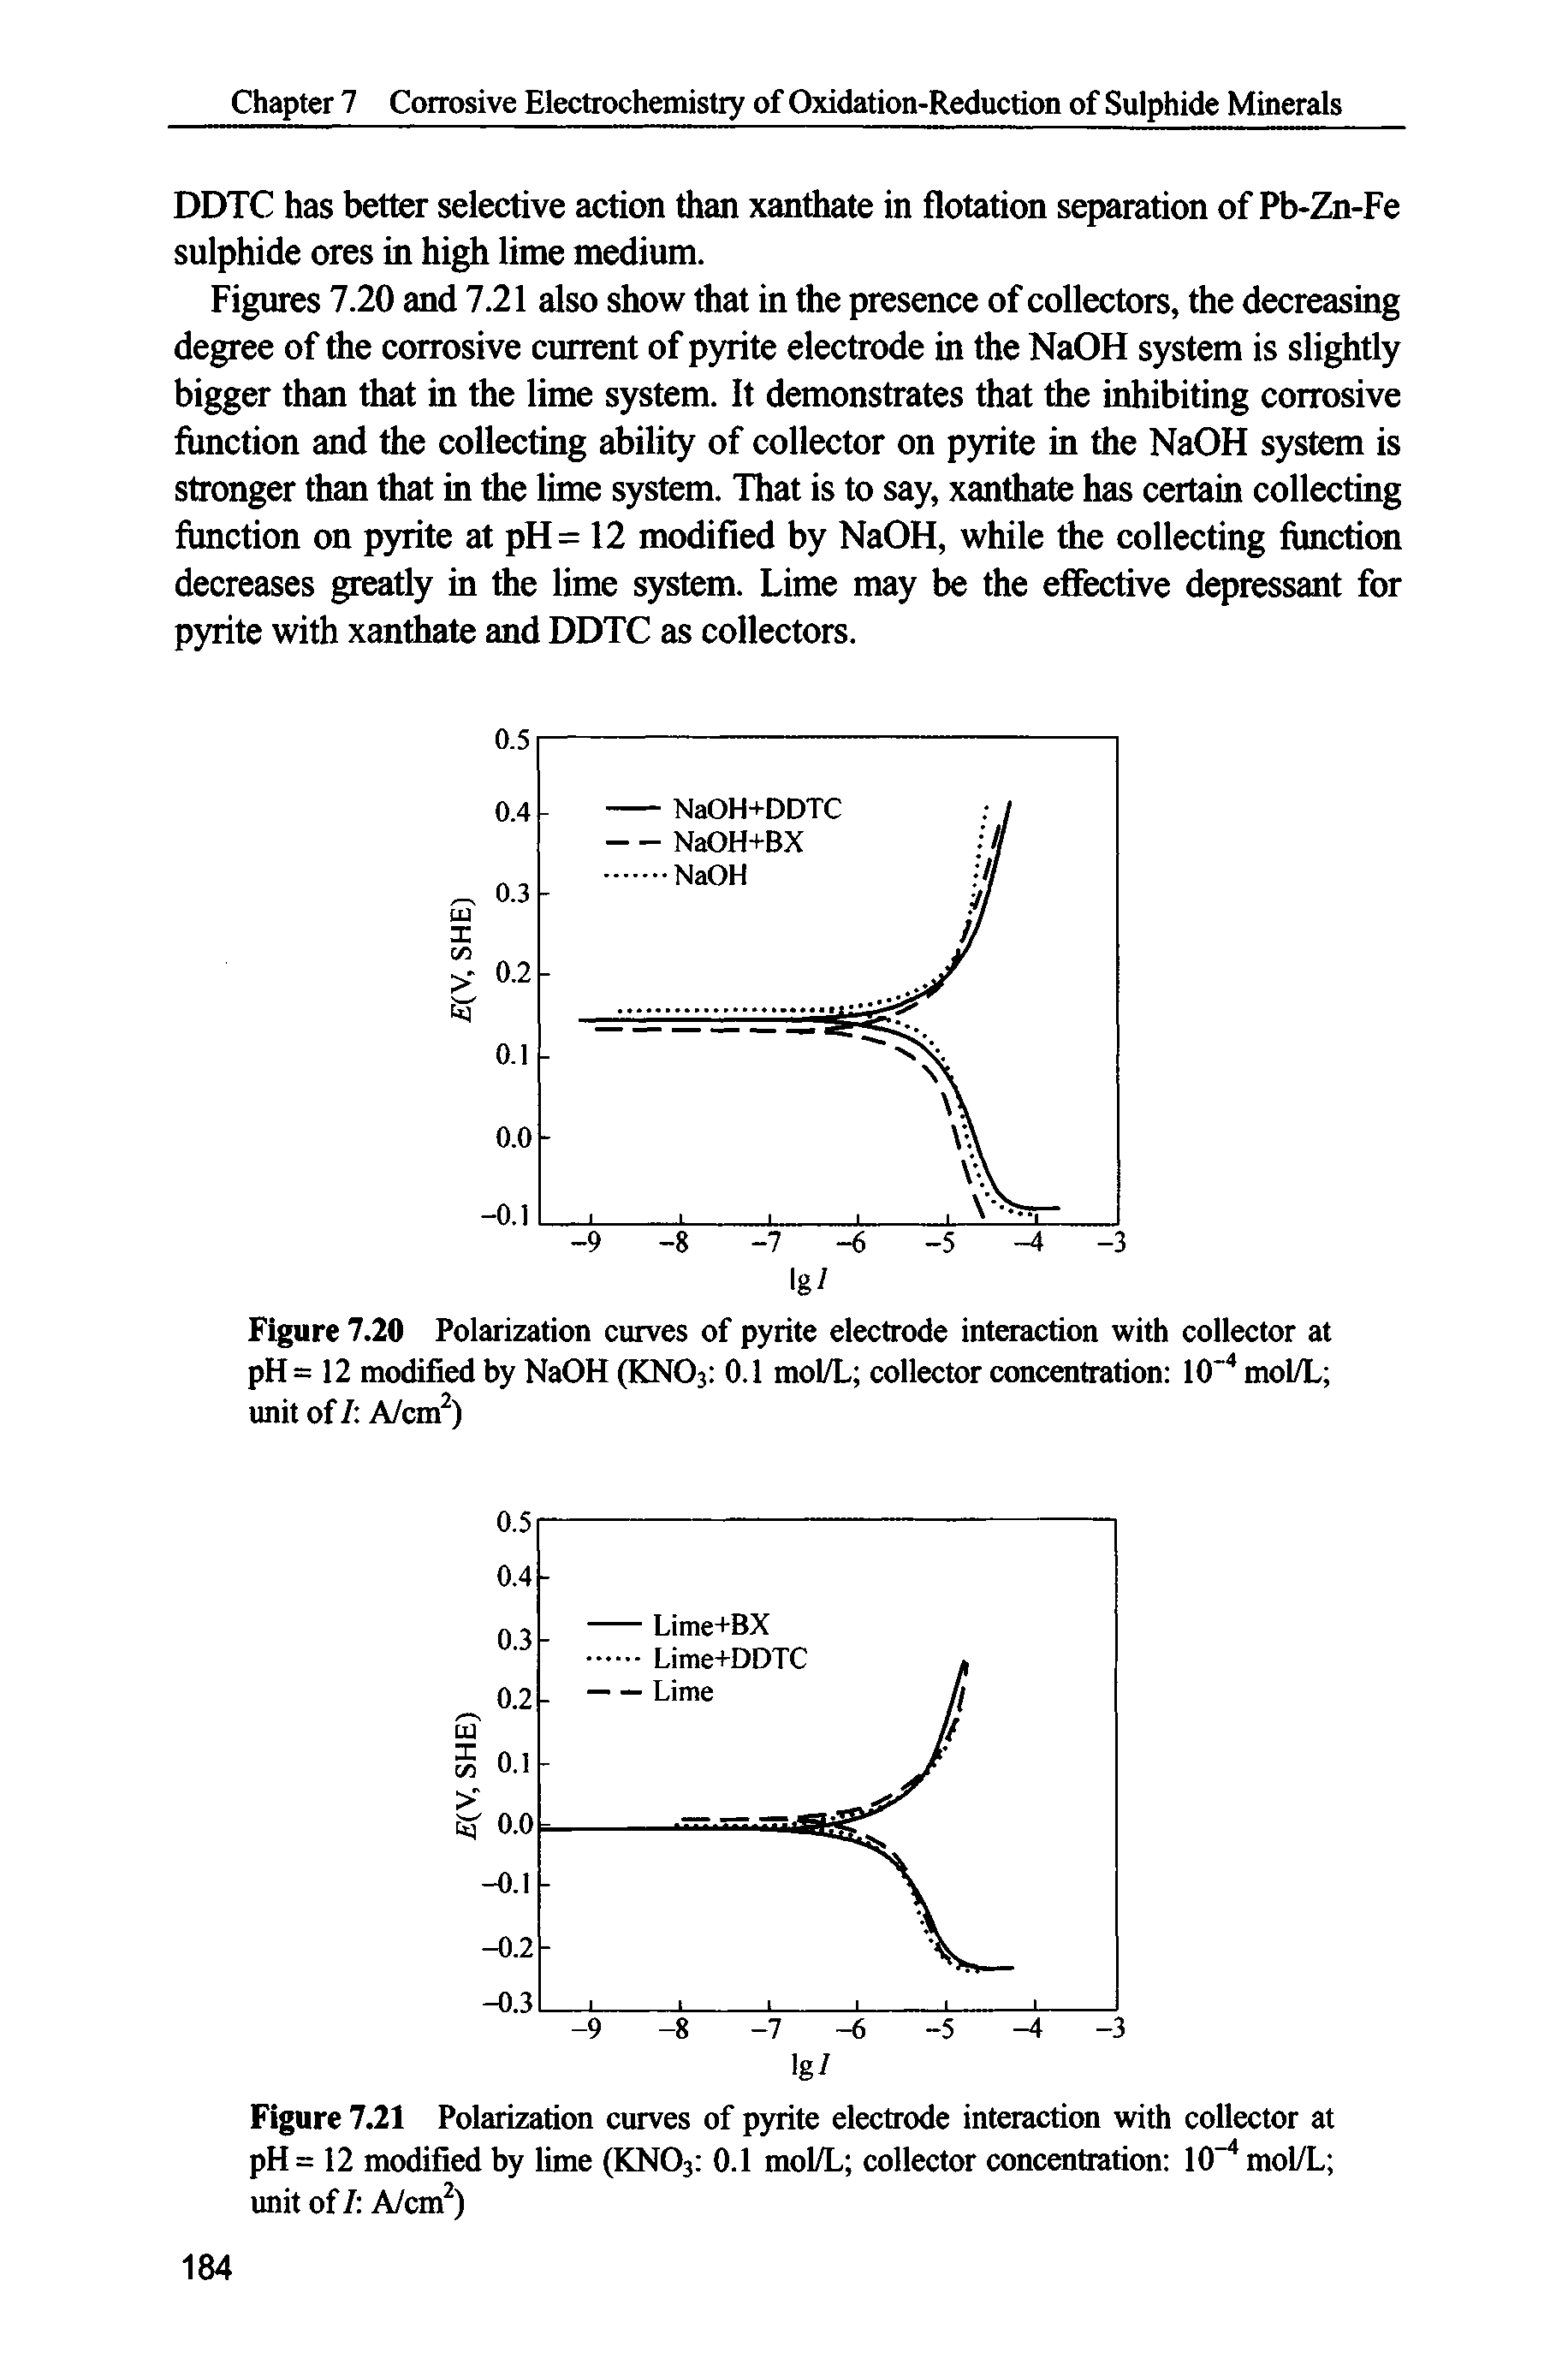 Figure 7.21 Polarization curves of pyrite electrode interaction with collector at pH = 12 modified by lime (KNO3 0.1 mol/L collector concentration 10" mol/L unit of / A/cw )...